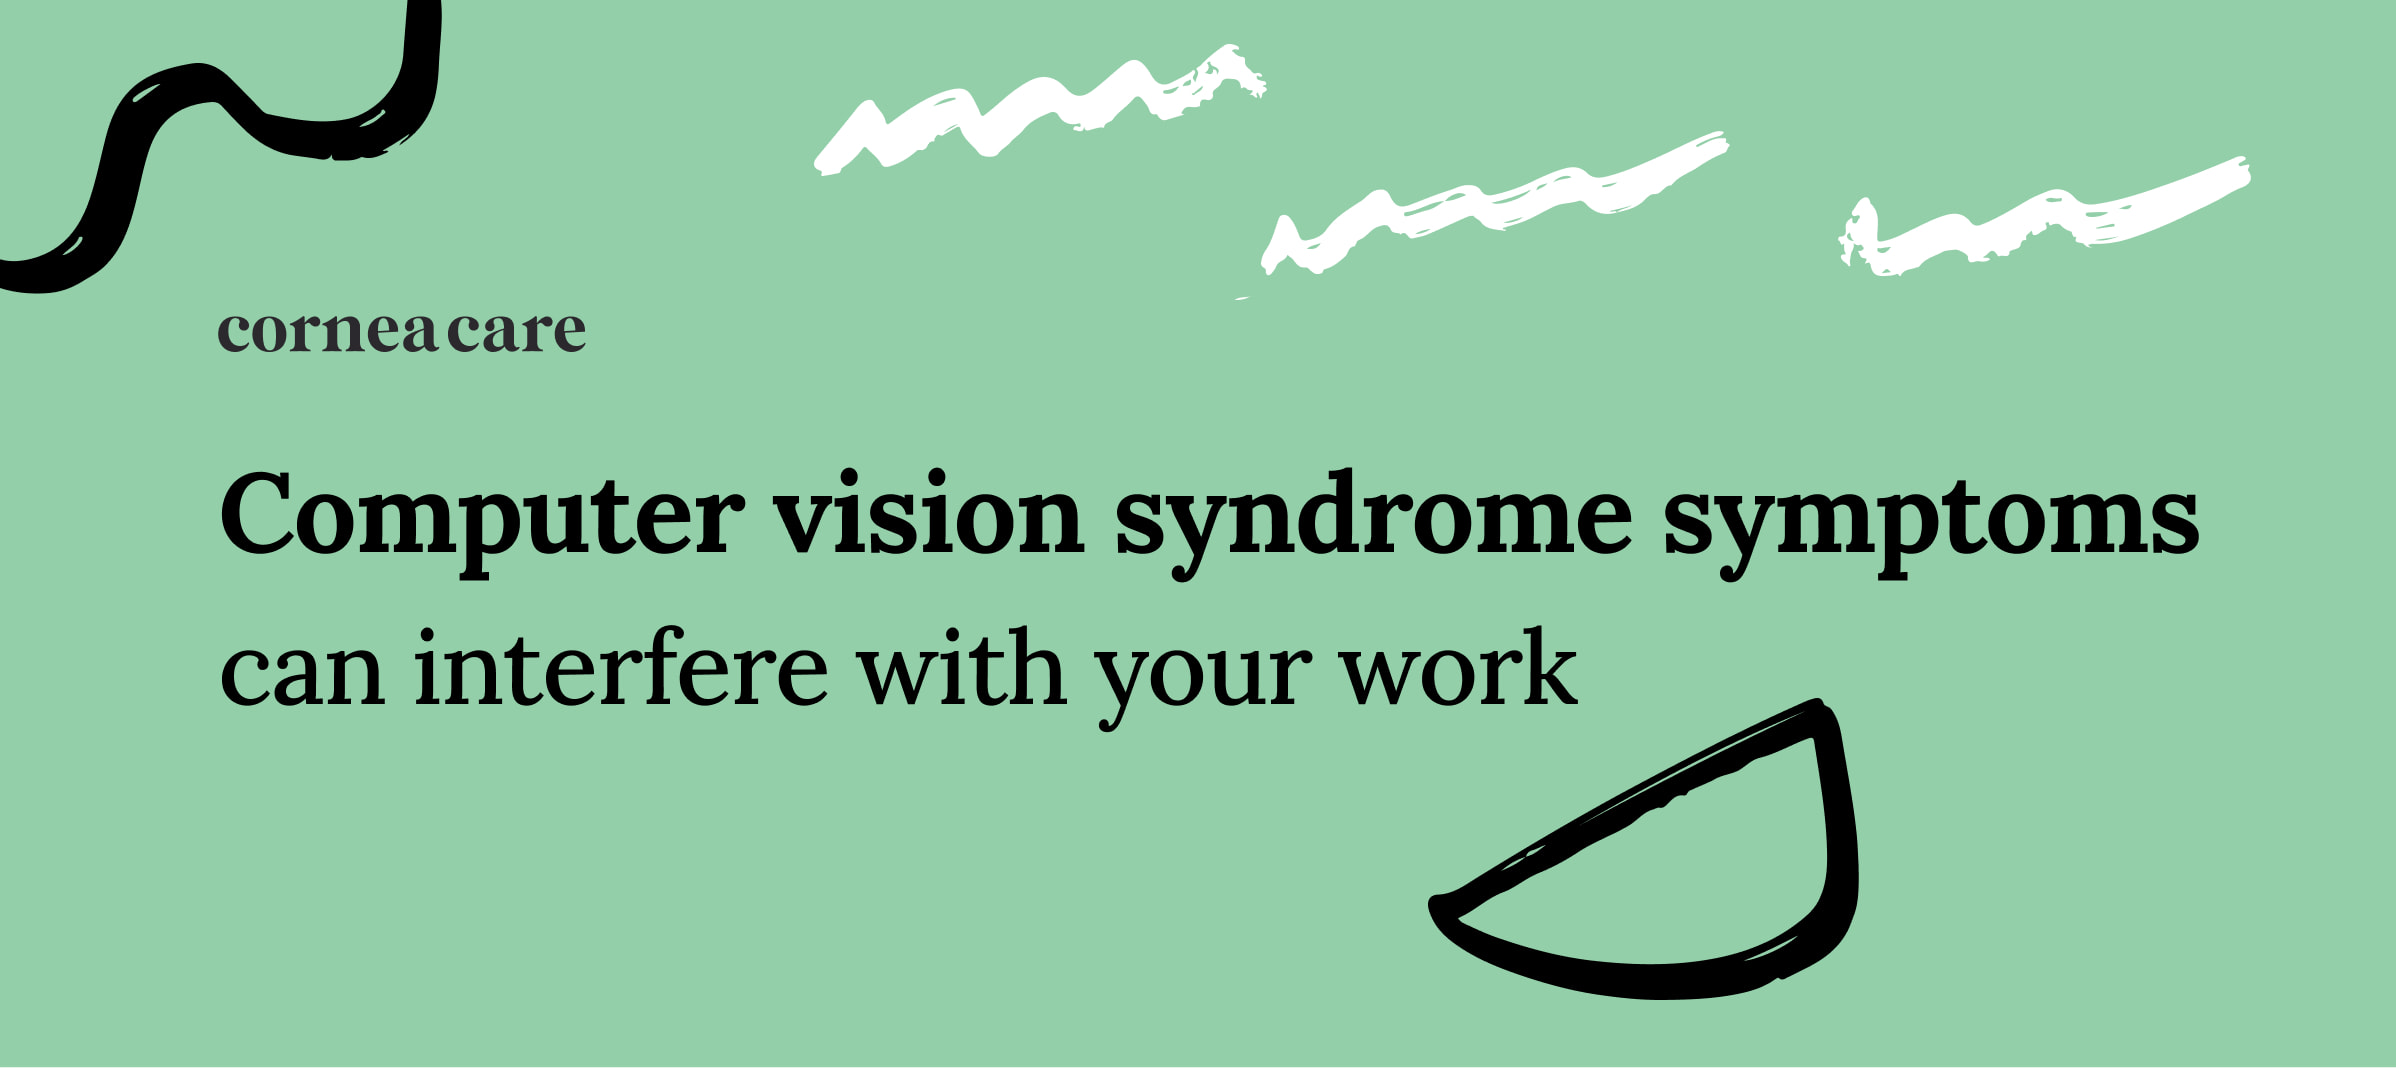 How to treat computer vision syndrome symptoms